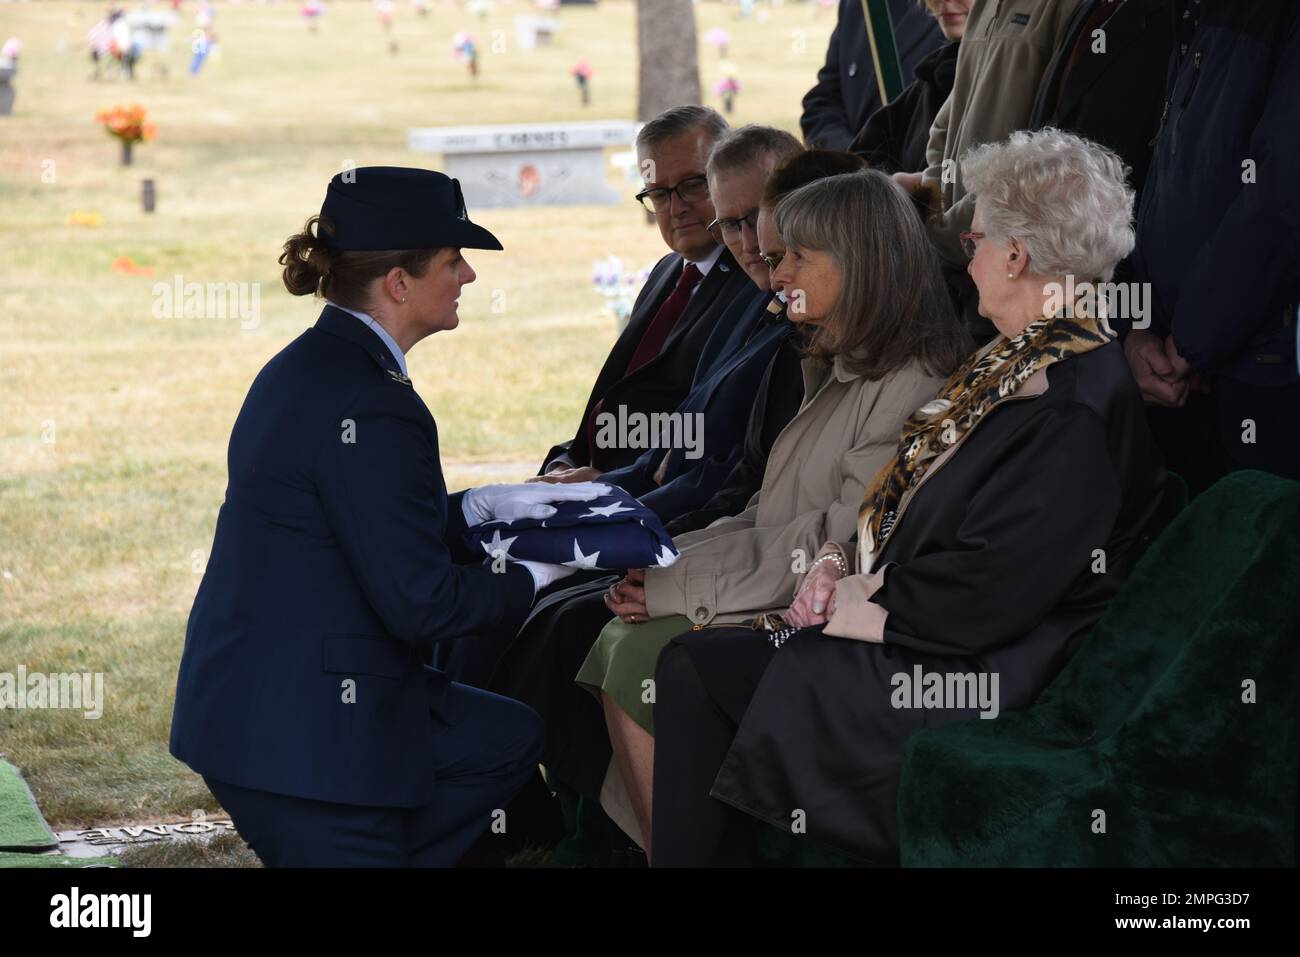 Mary Page of Denver, Colo., daughter of former 185th Fighter Group Commander Col. Warren Nelson is presented a U.S. flag from 185th Air Refueling Wing Commander Col. Sonya Morrison at the funeral of her father in Sioux City, Iowa on October 14, 2022. Nelson was the last World War II veteran to serve as 185th Commander when he retired in 1980, he recently passed away at the age of 97. U.S. Air National Guard photo Senior Master Sgt. Vincent De Groot 185th ARW Wing PA Stock Photo